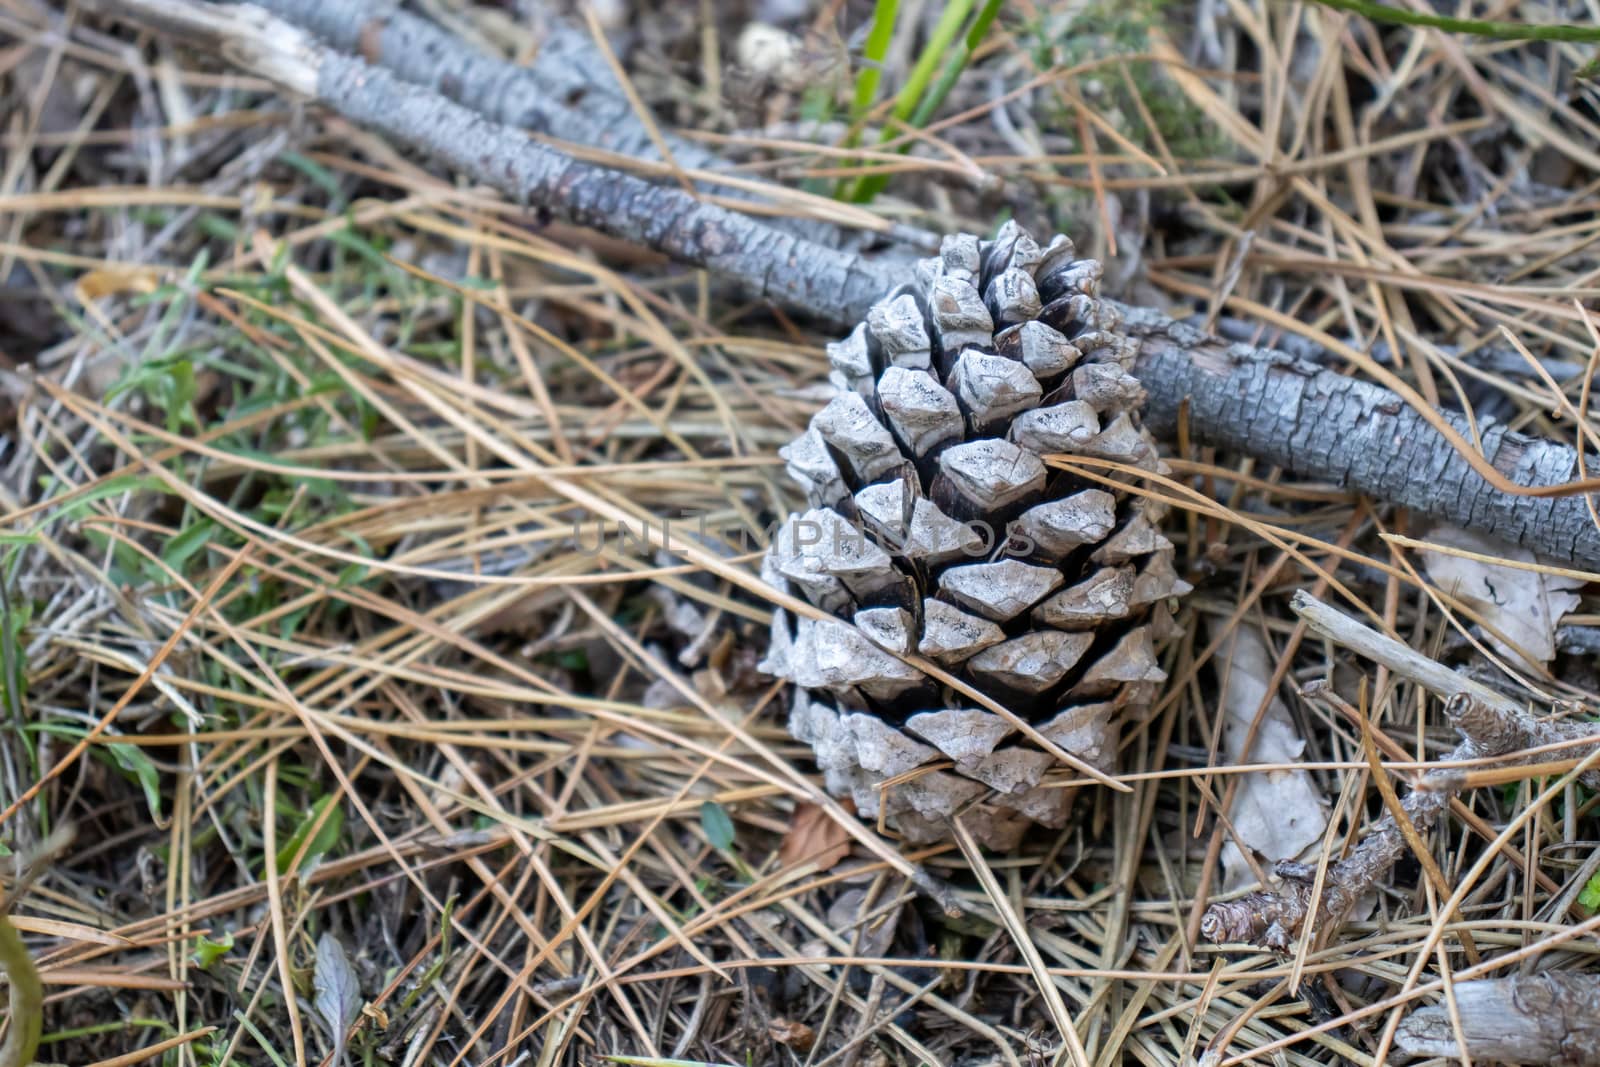 pine cone up close in the ground among the pine needles by Andreajk3